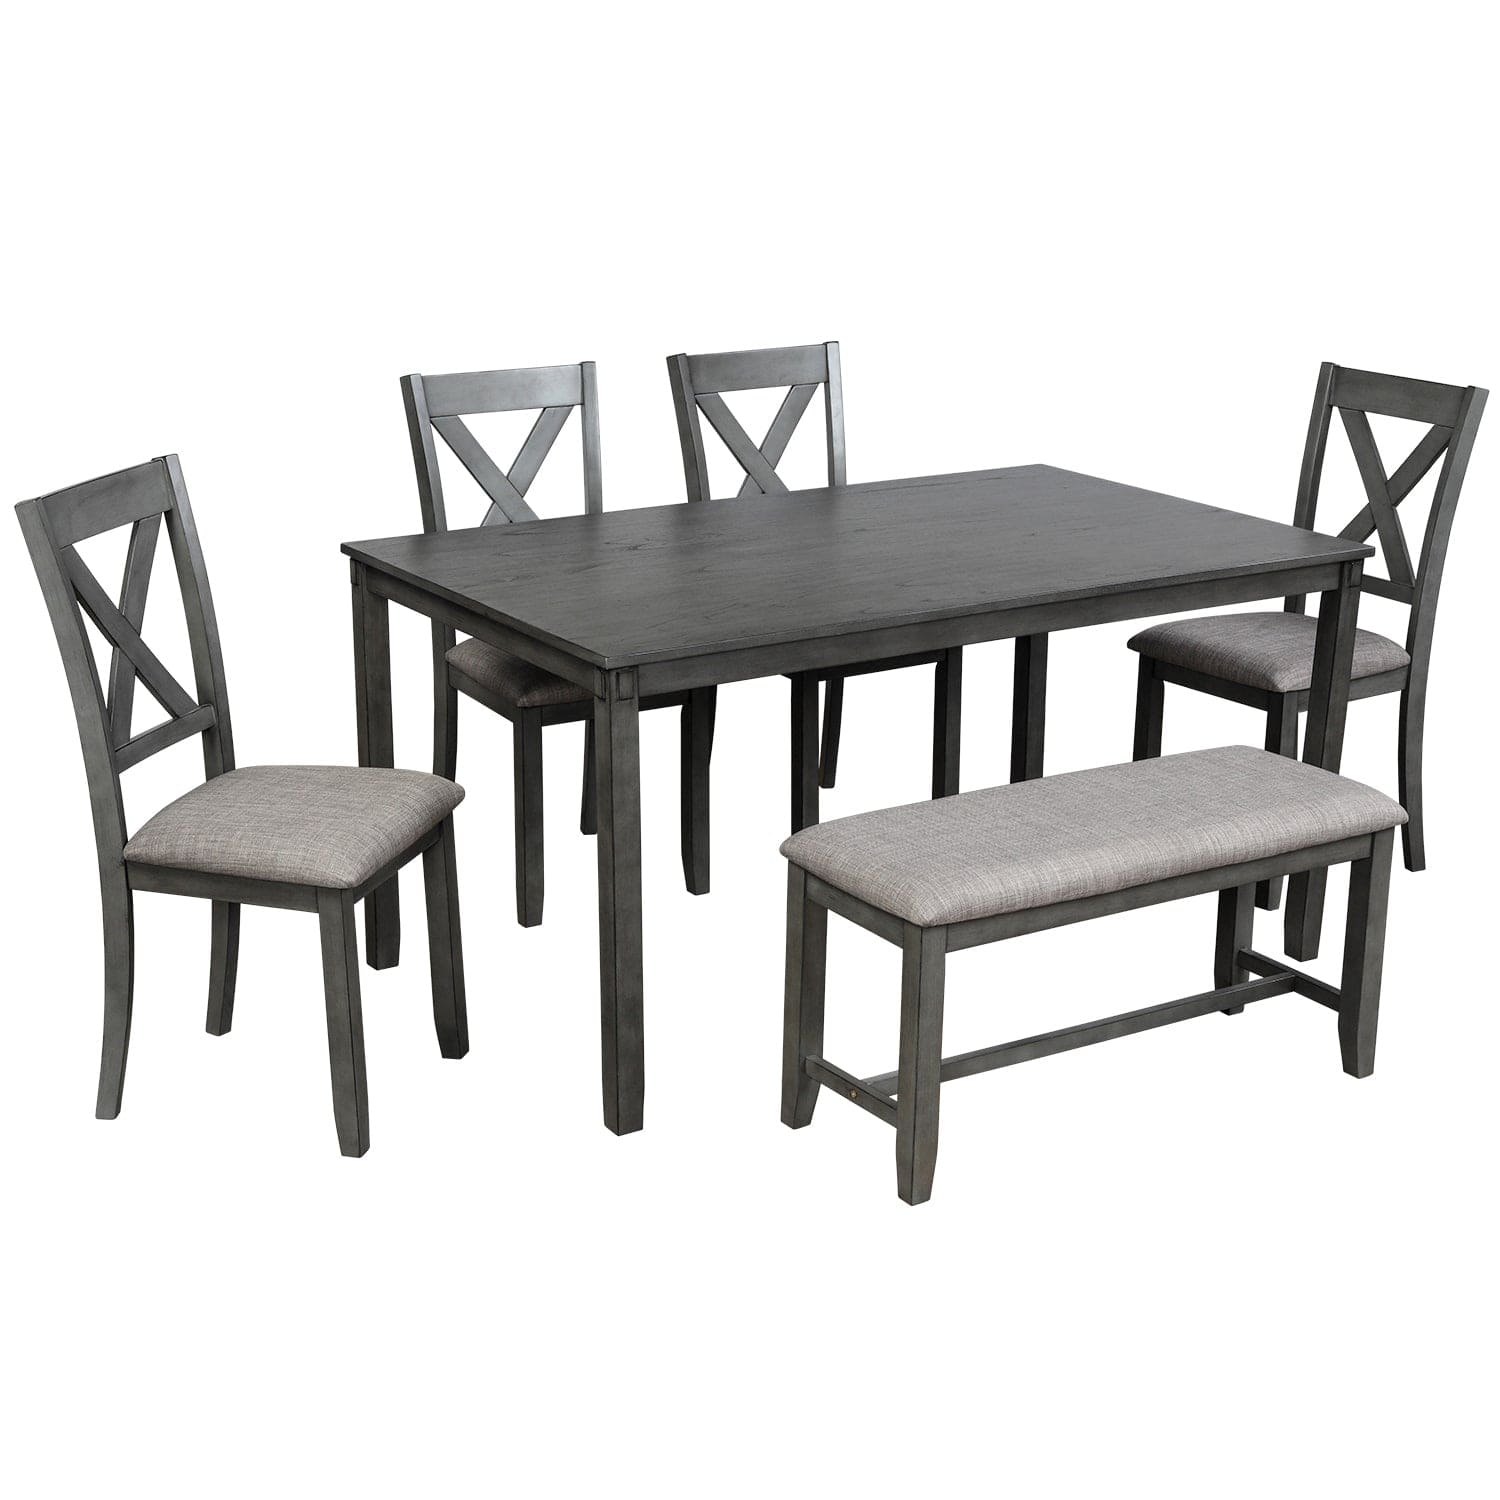 1st Choice Furniture Direct Dining Room Sets 1st Choice Wooden 6-Piece Dining Table Set with Chairs & Bench (Grey)